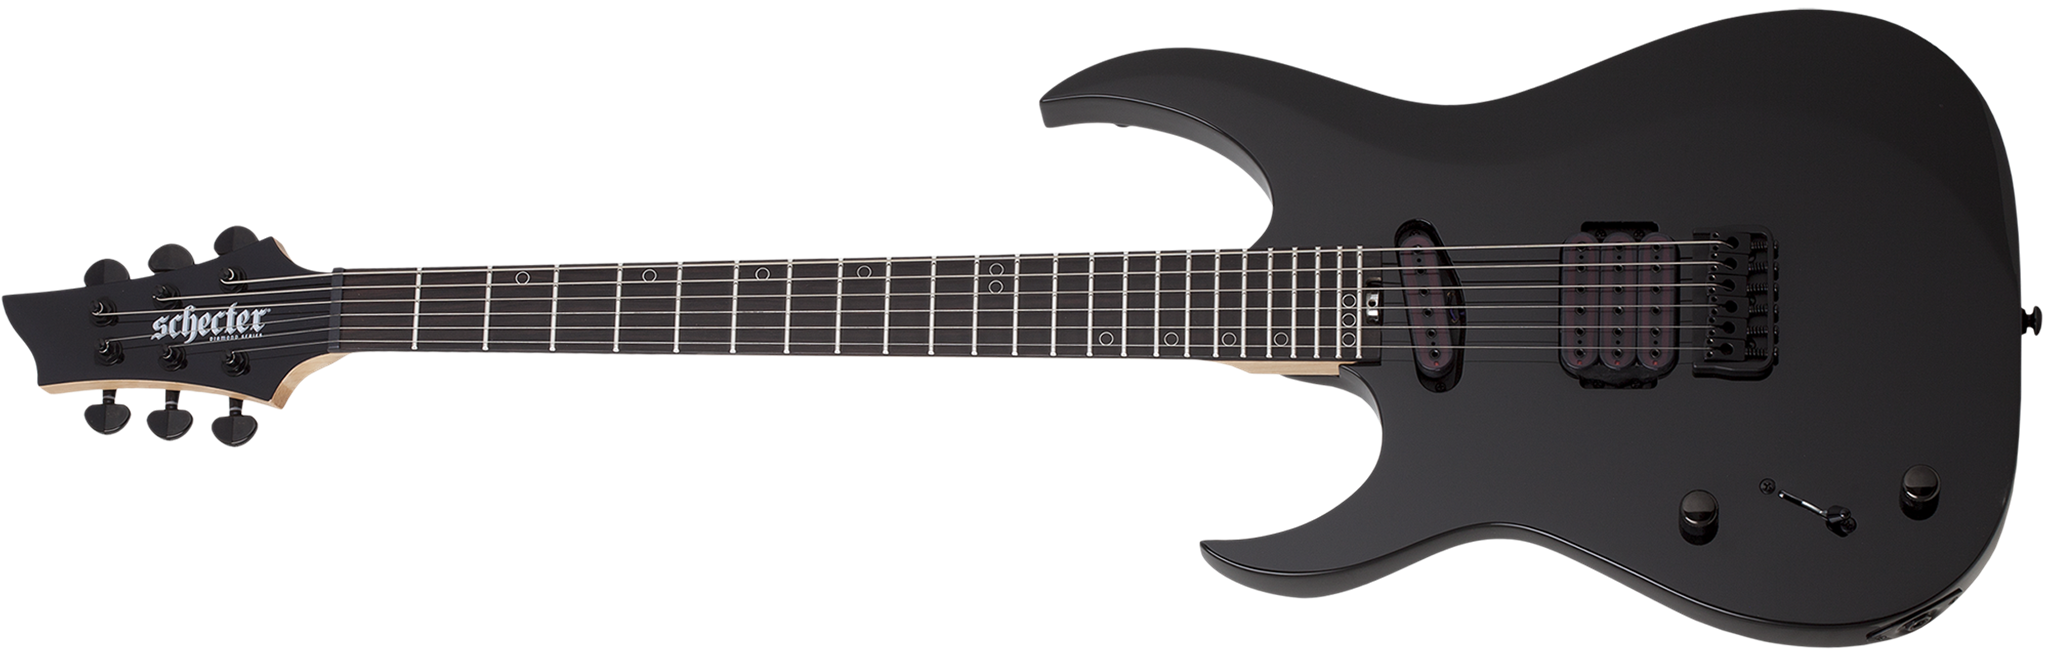 Schecter DIAMOND SERIES Sunset-6 Triad Gloss Black Left Handed    6-String Electric Guitar